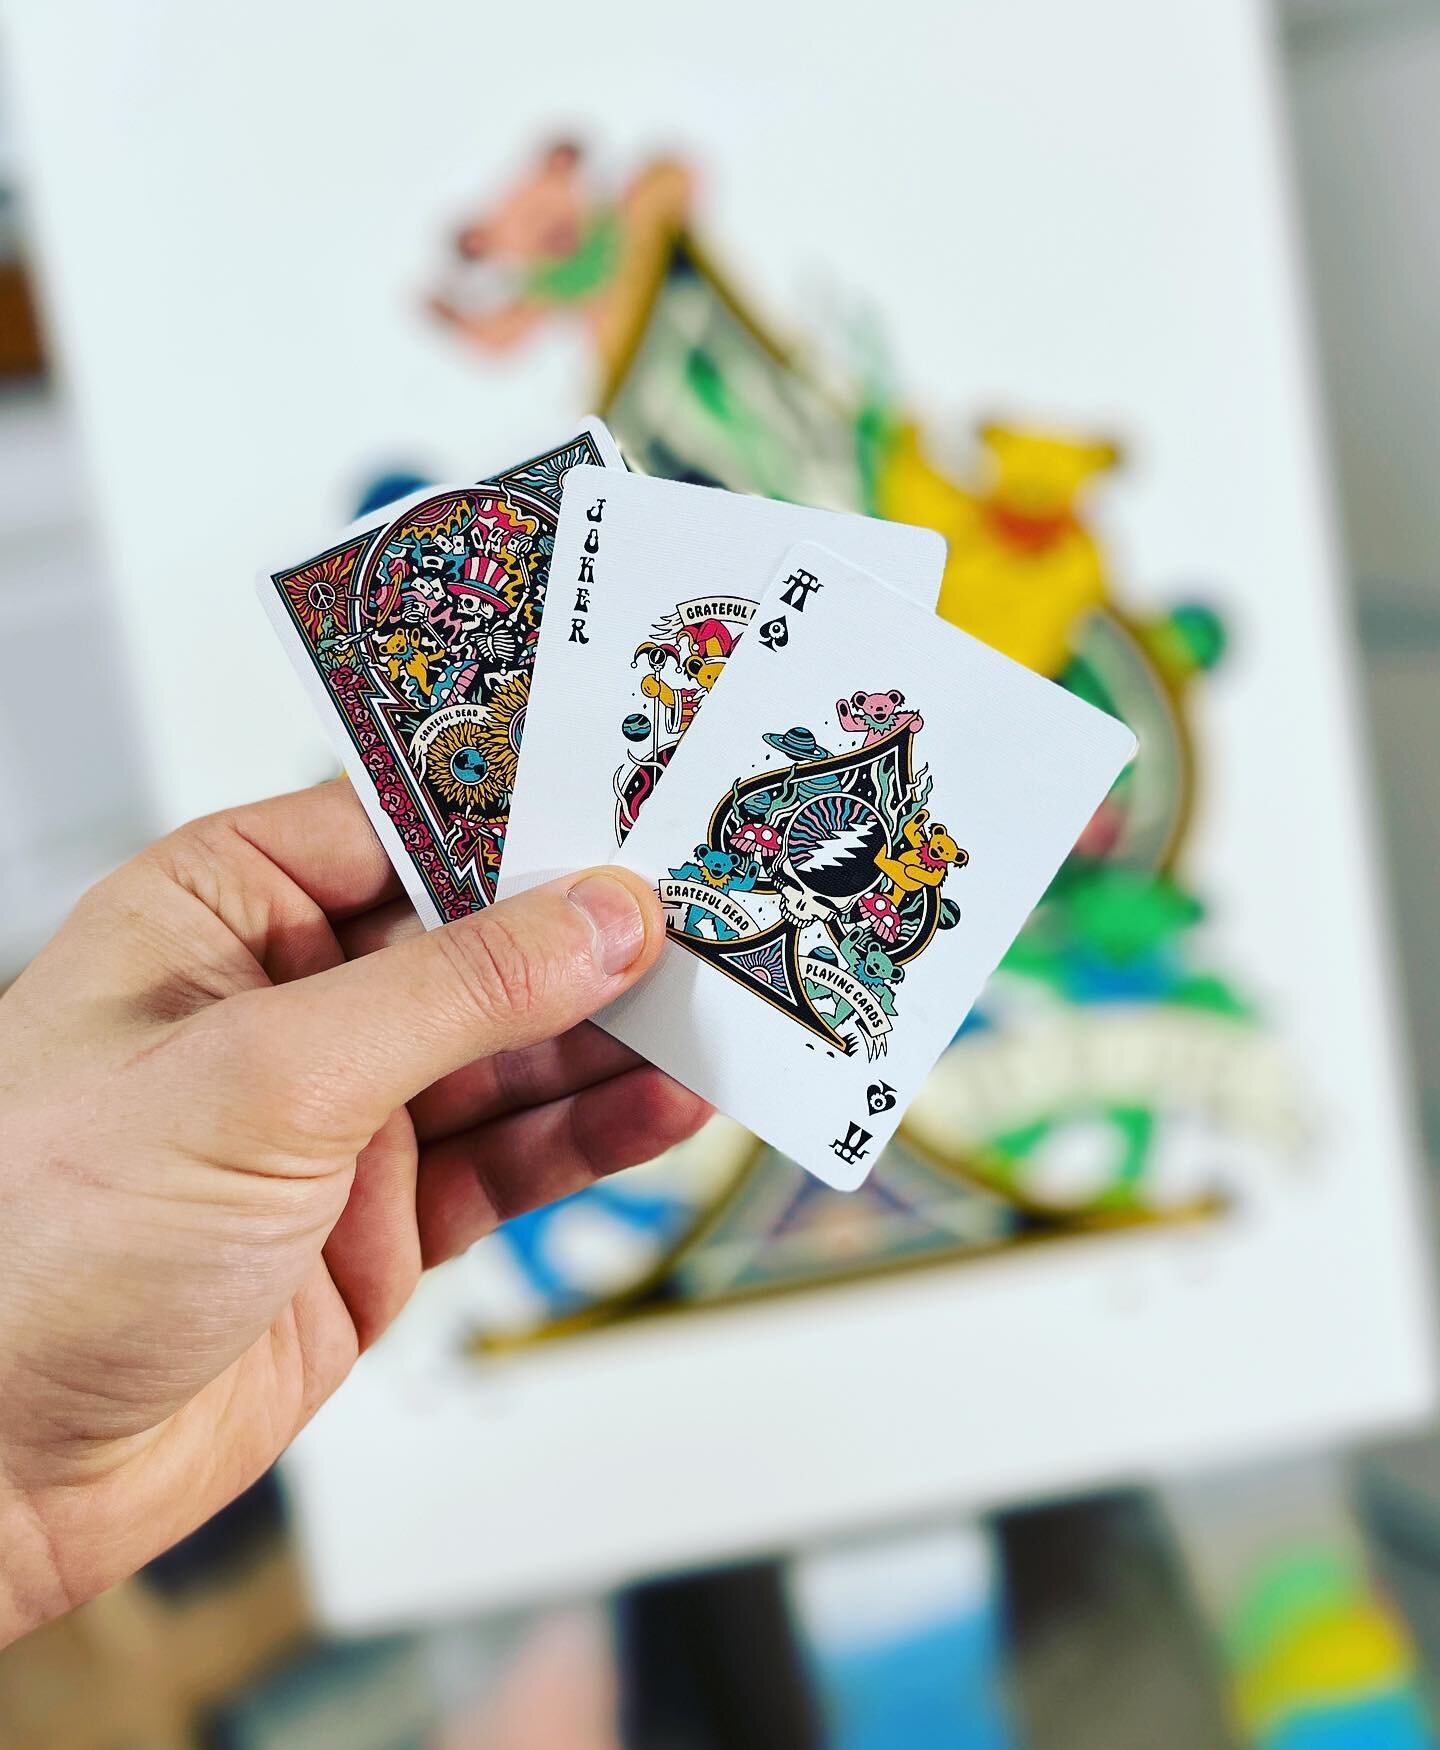 WIP - Some new work coming soon! Making more life size playing cards, some NFTs...yes NFTs, and some other cool stuff. Been working hard in the shadows and today is a perfect day to officially relaunch&hellip;let&rsquo;s go!